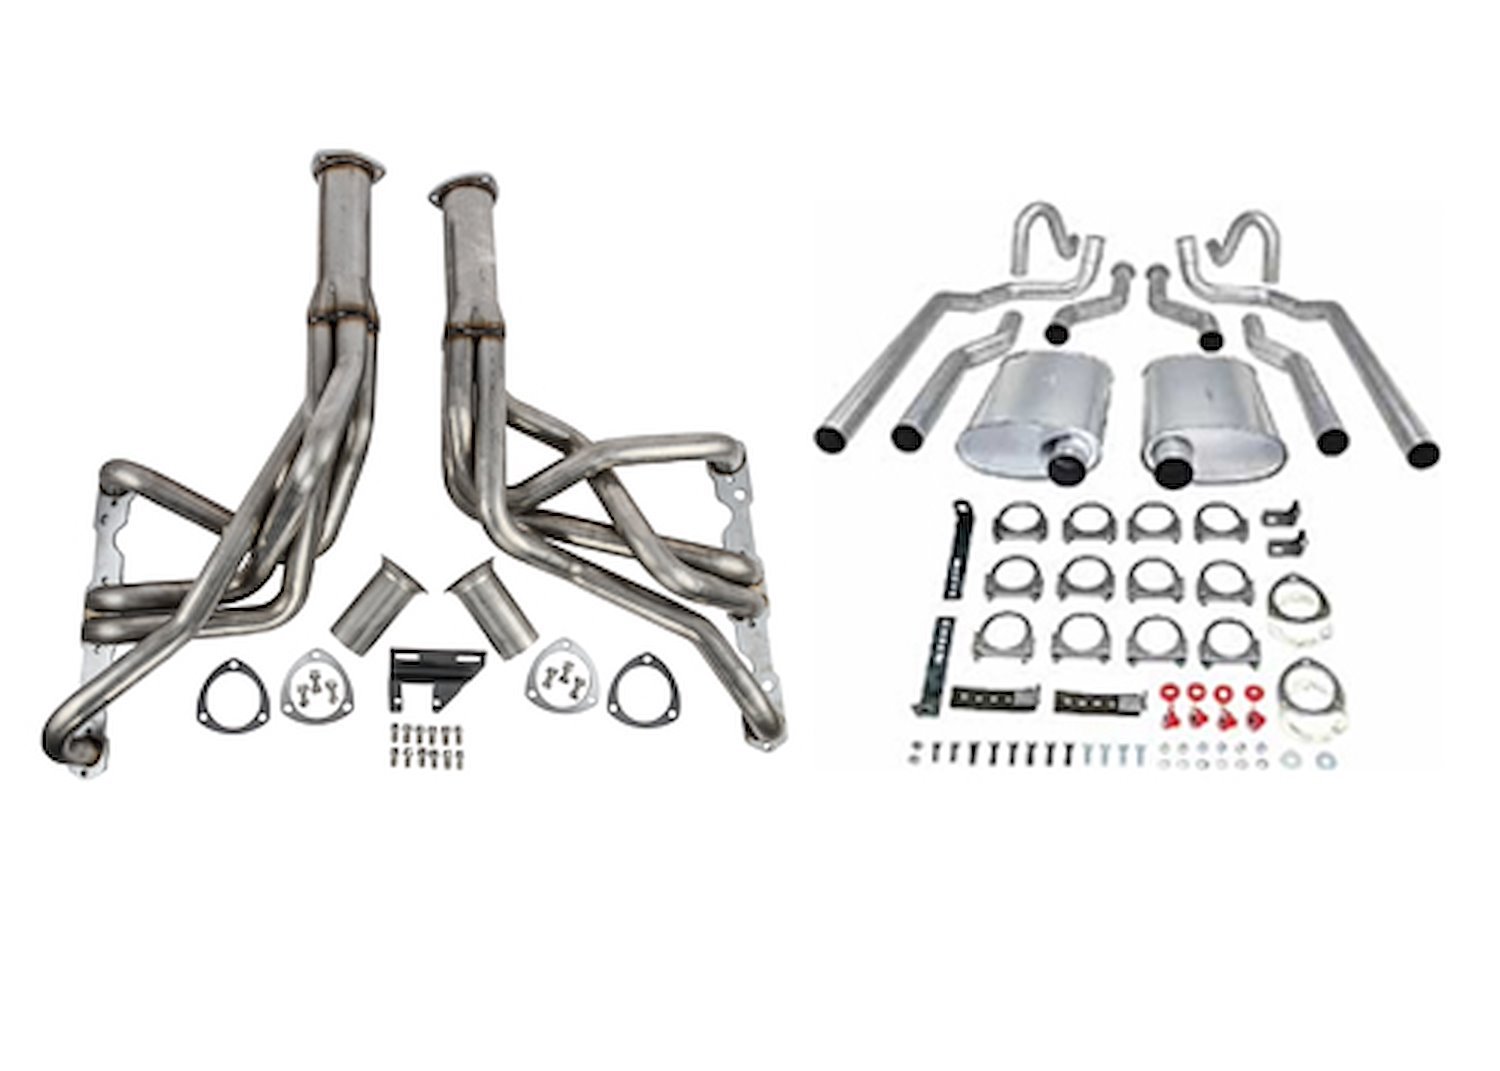 Exhaust Kit [Stainless Steel]